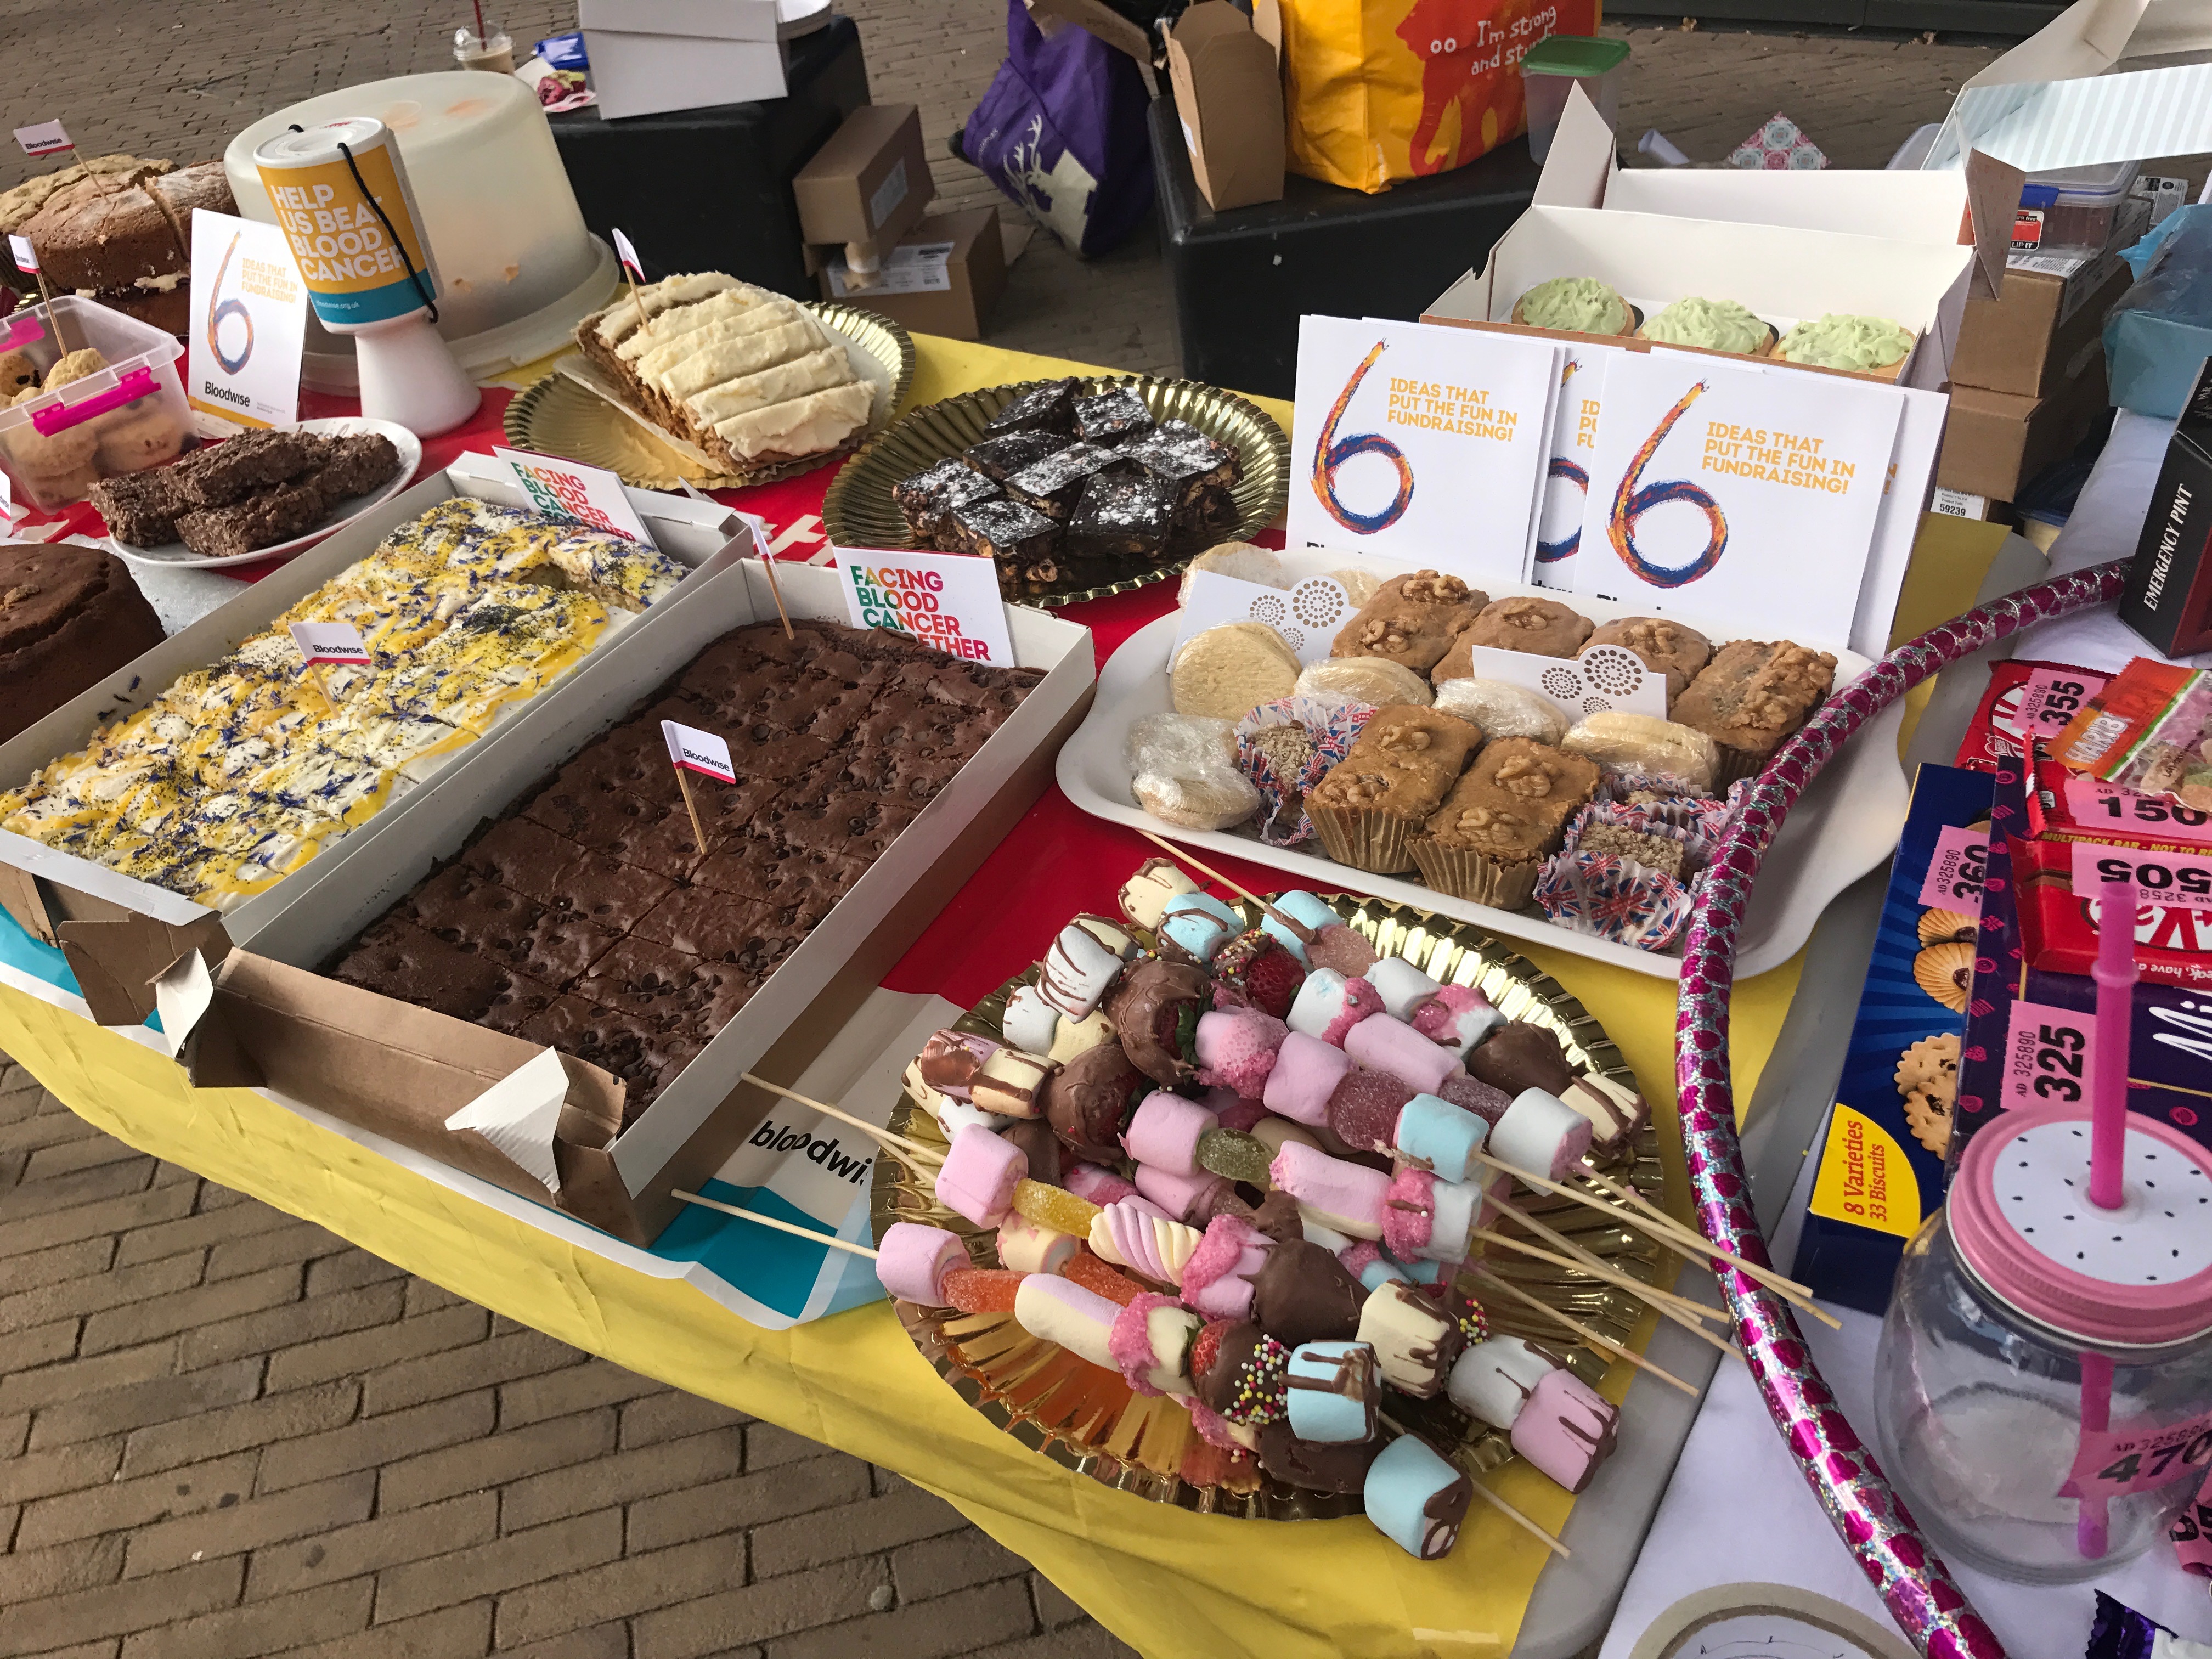 bake-sale-in-telford-raises-hundreds-for-bloodwise-sentinel-care-services